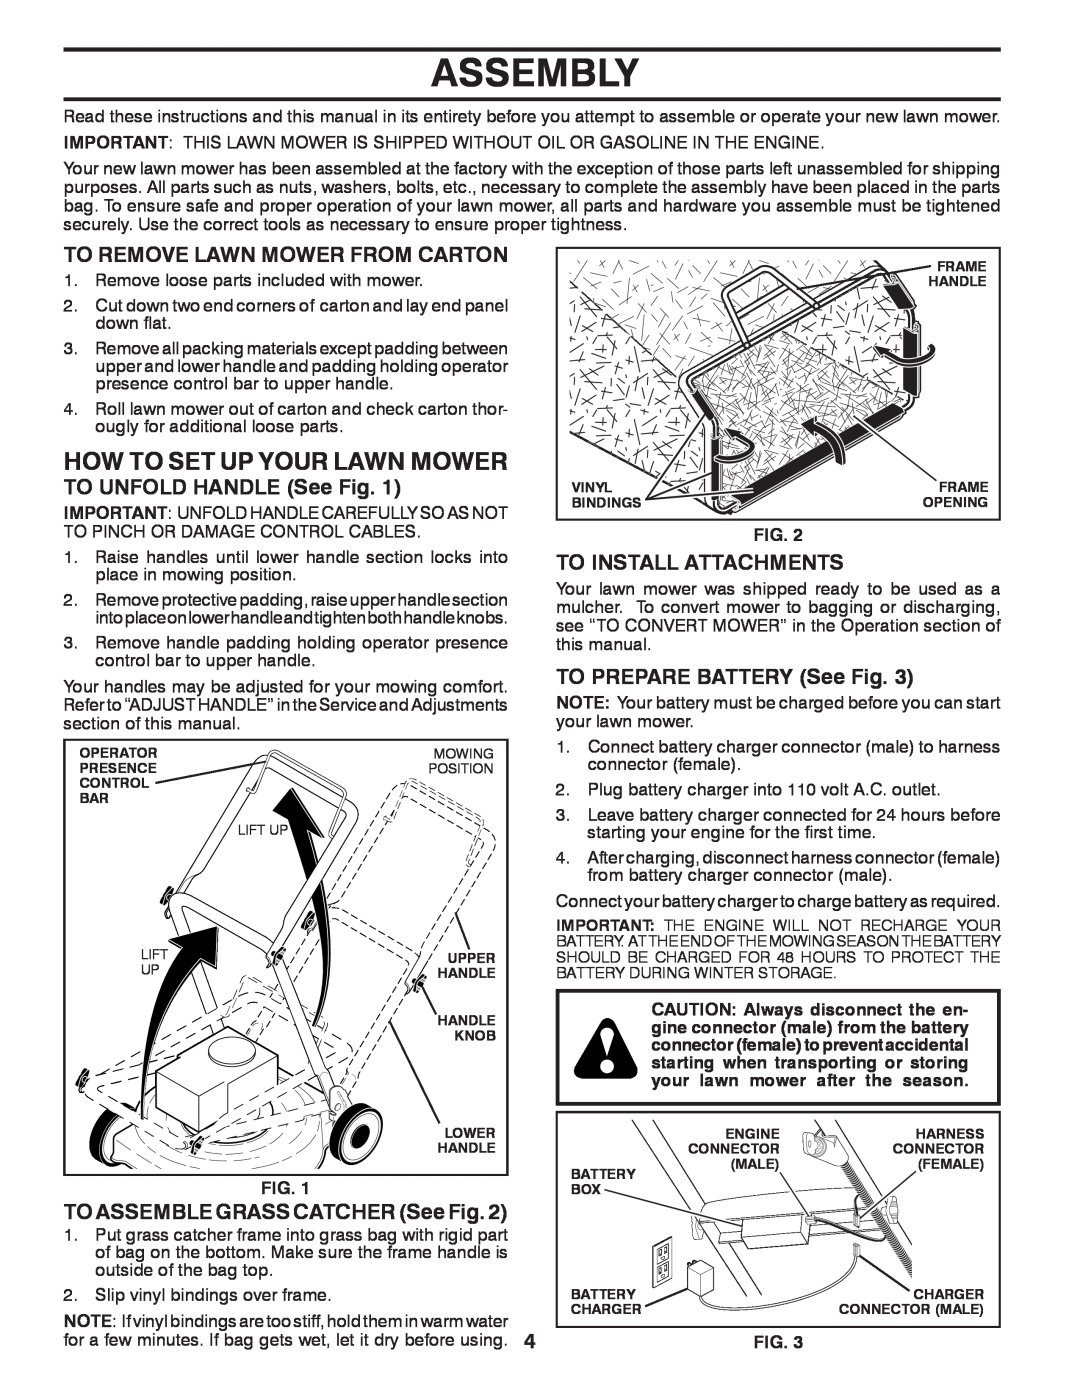 Husqvarna XT722FE manual Assembly, To Remove Lawn Mower From Carton, TO UNFOLD HANDLE See Fig, To Install Attachments 